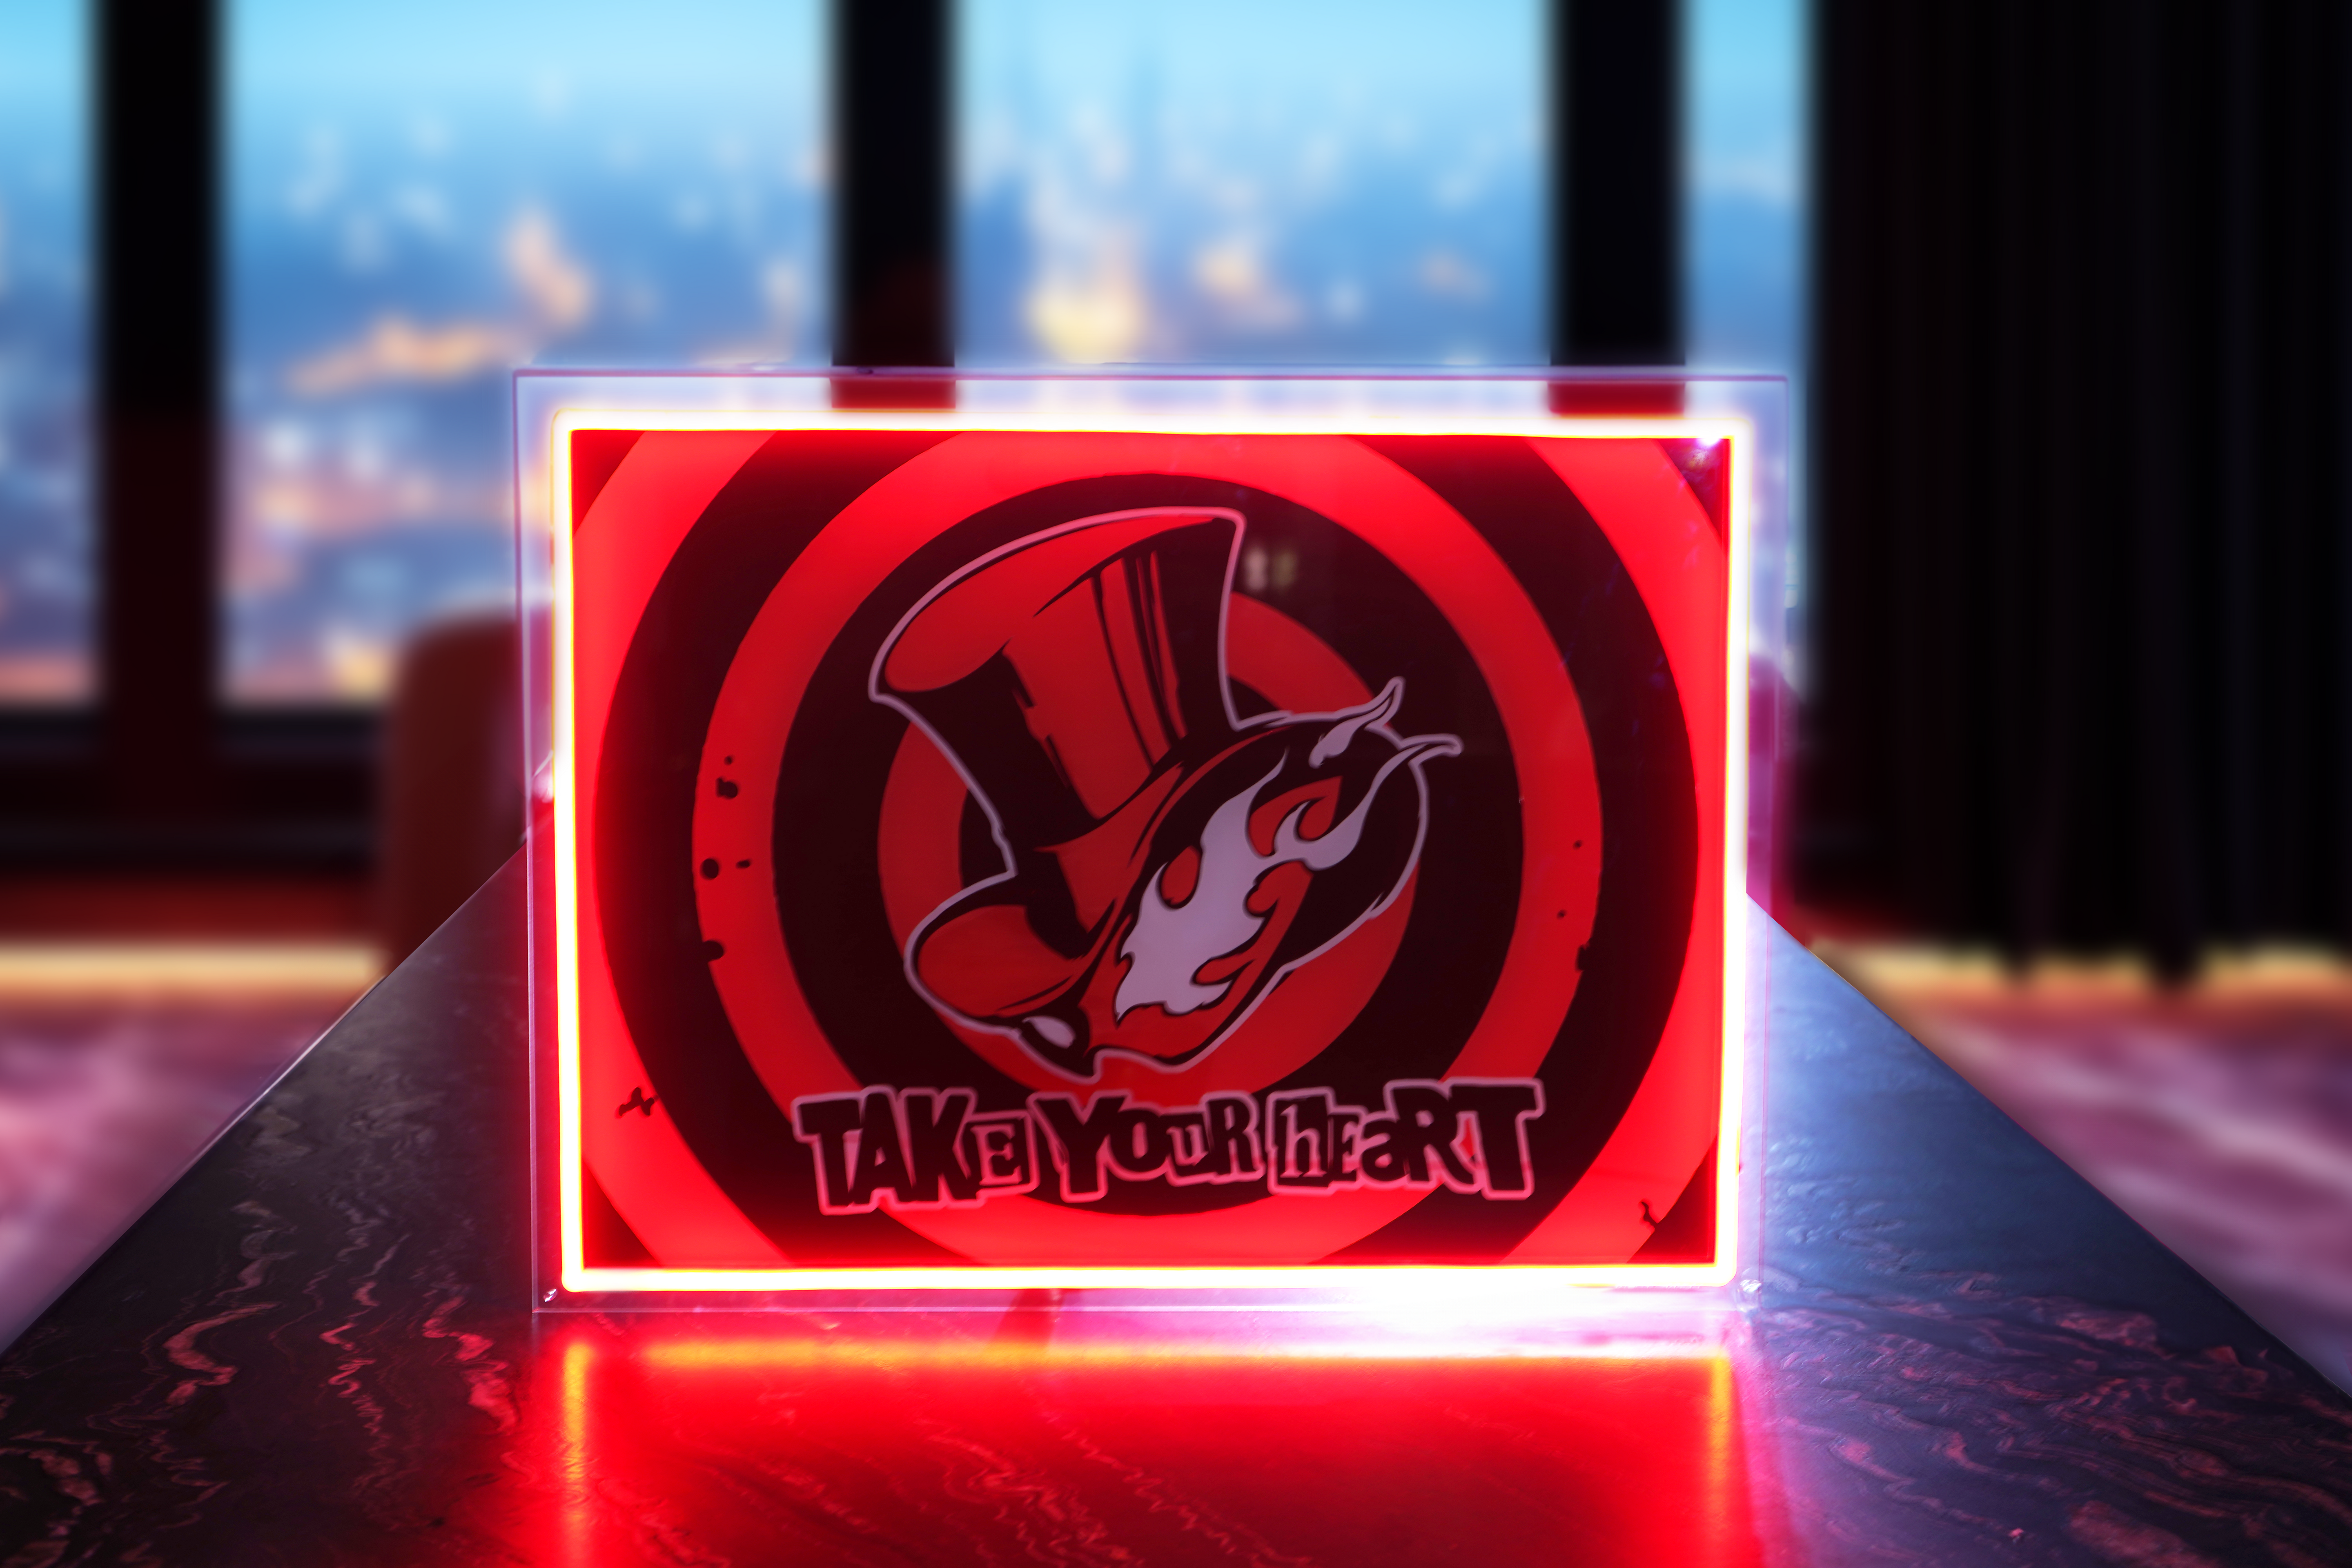 Calling Card Neon LED Poster 2FT (Persona 5 Royal)